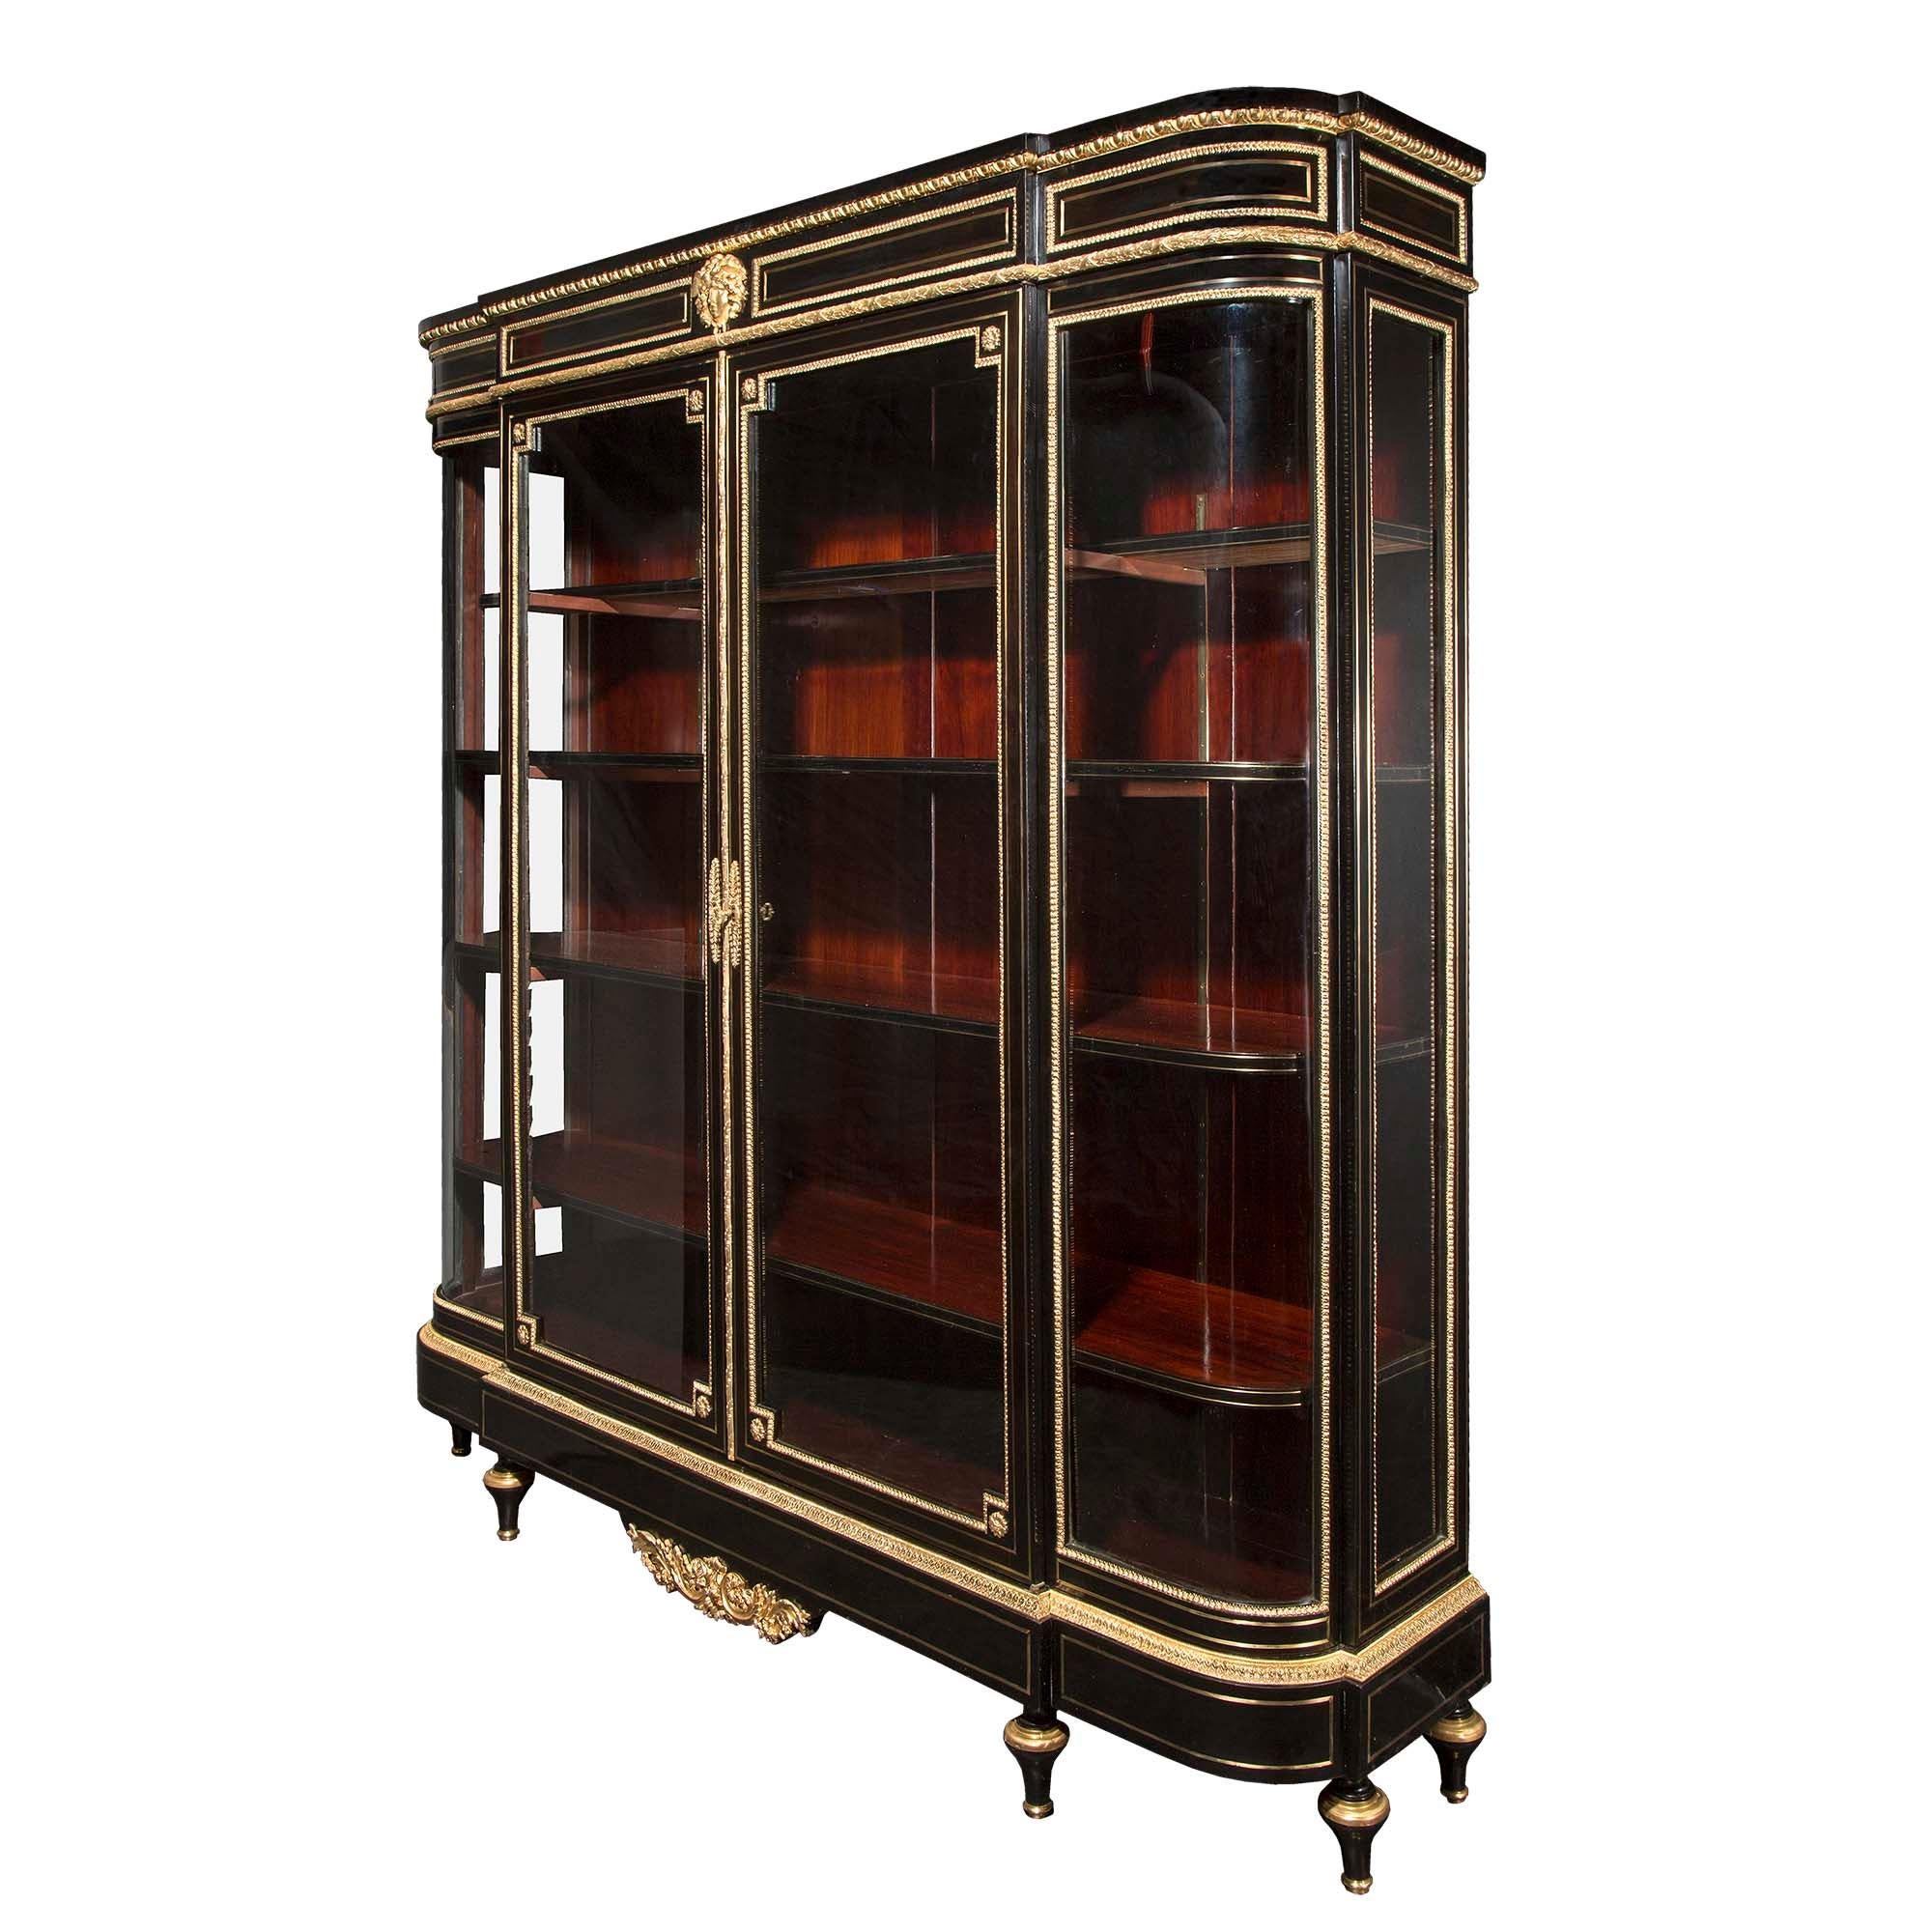 French 19th Century Napoleon III Period Ebony, Brass and Ormolu Boulle Vitrine In Good Condition For Sale In West Palm Beach, FL